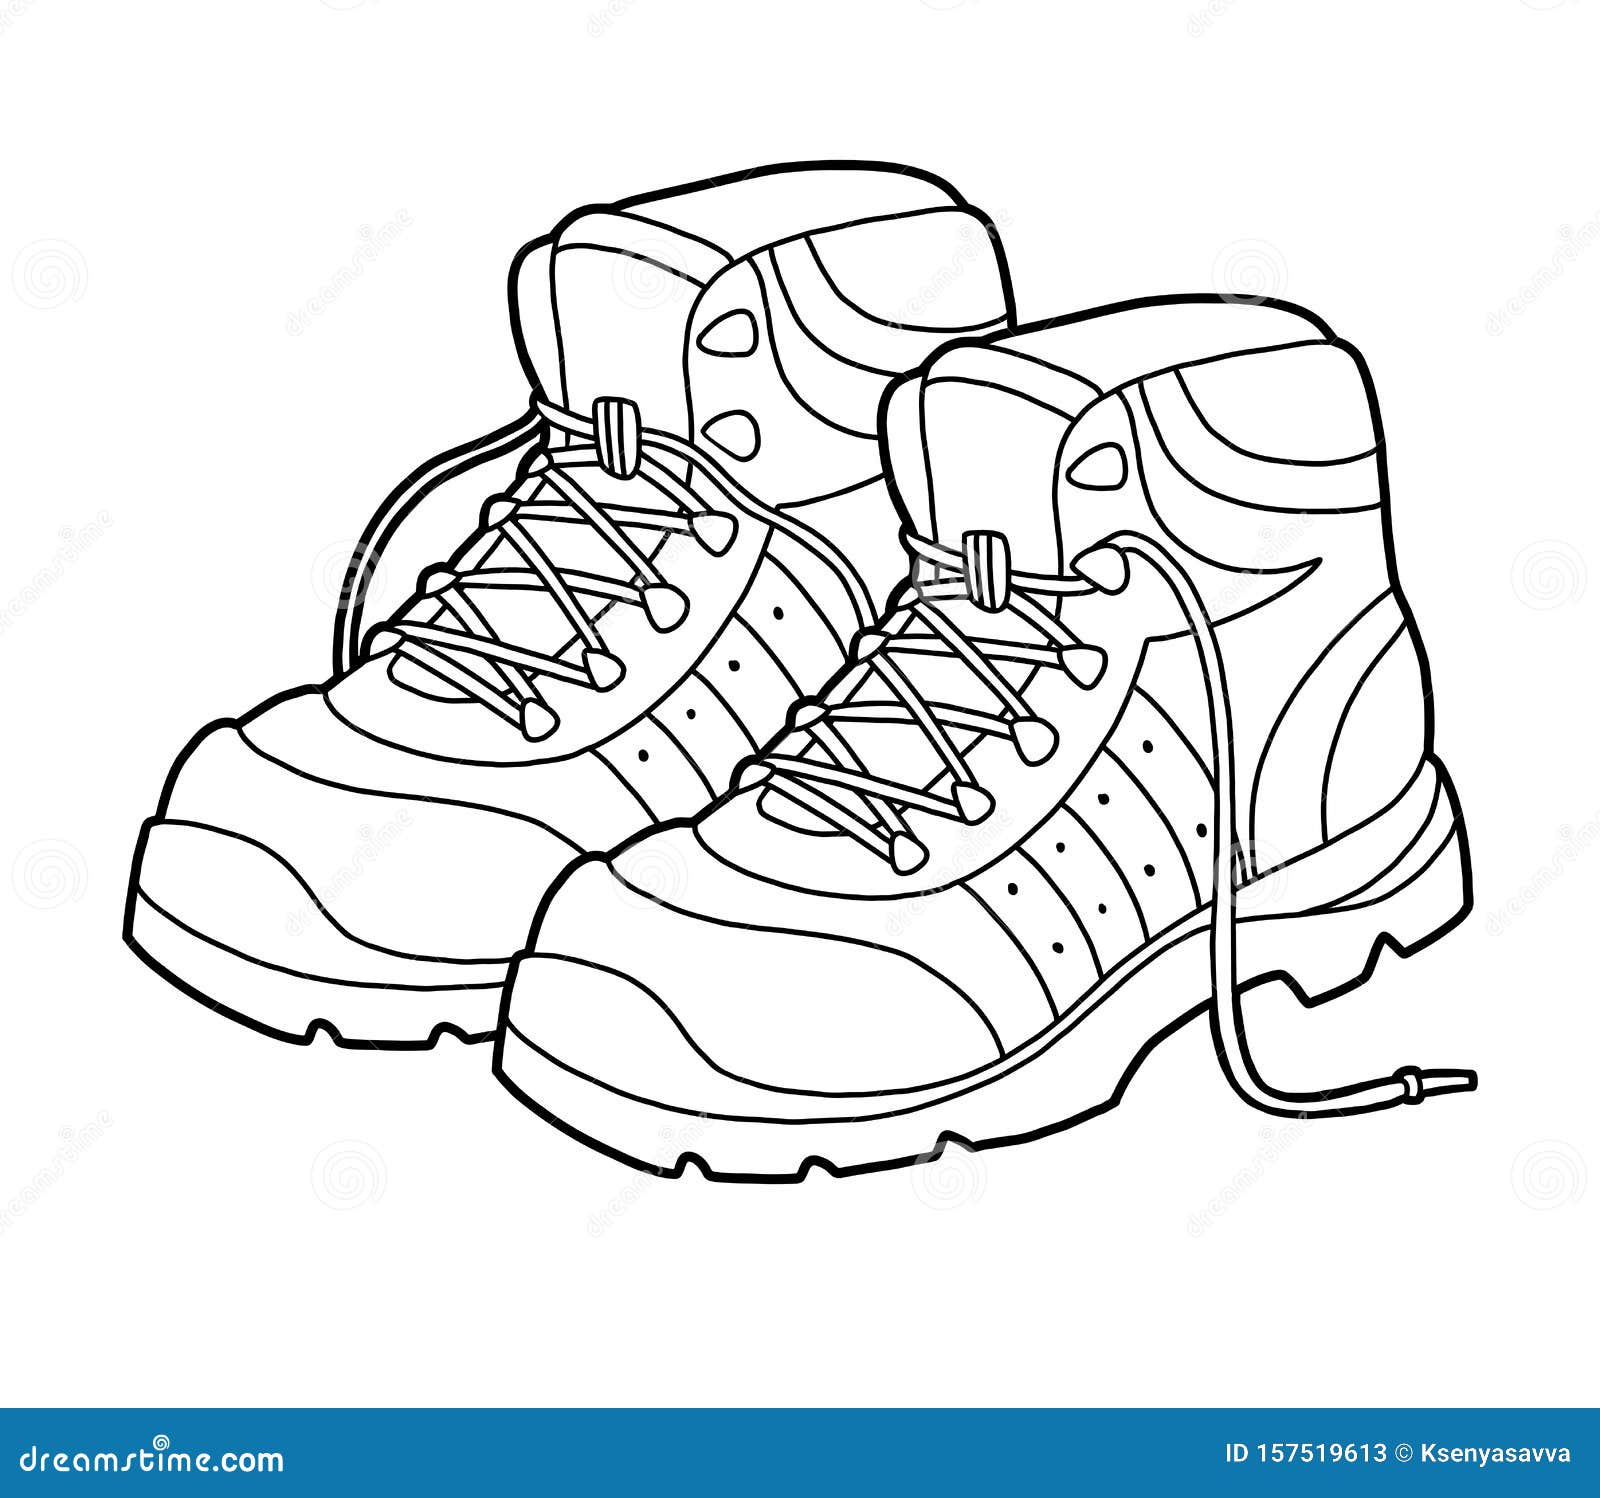 Coloring Book, Cartoon Shoe Collection. Hiking Boots Stock Vector ...